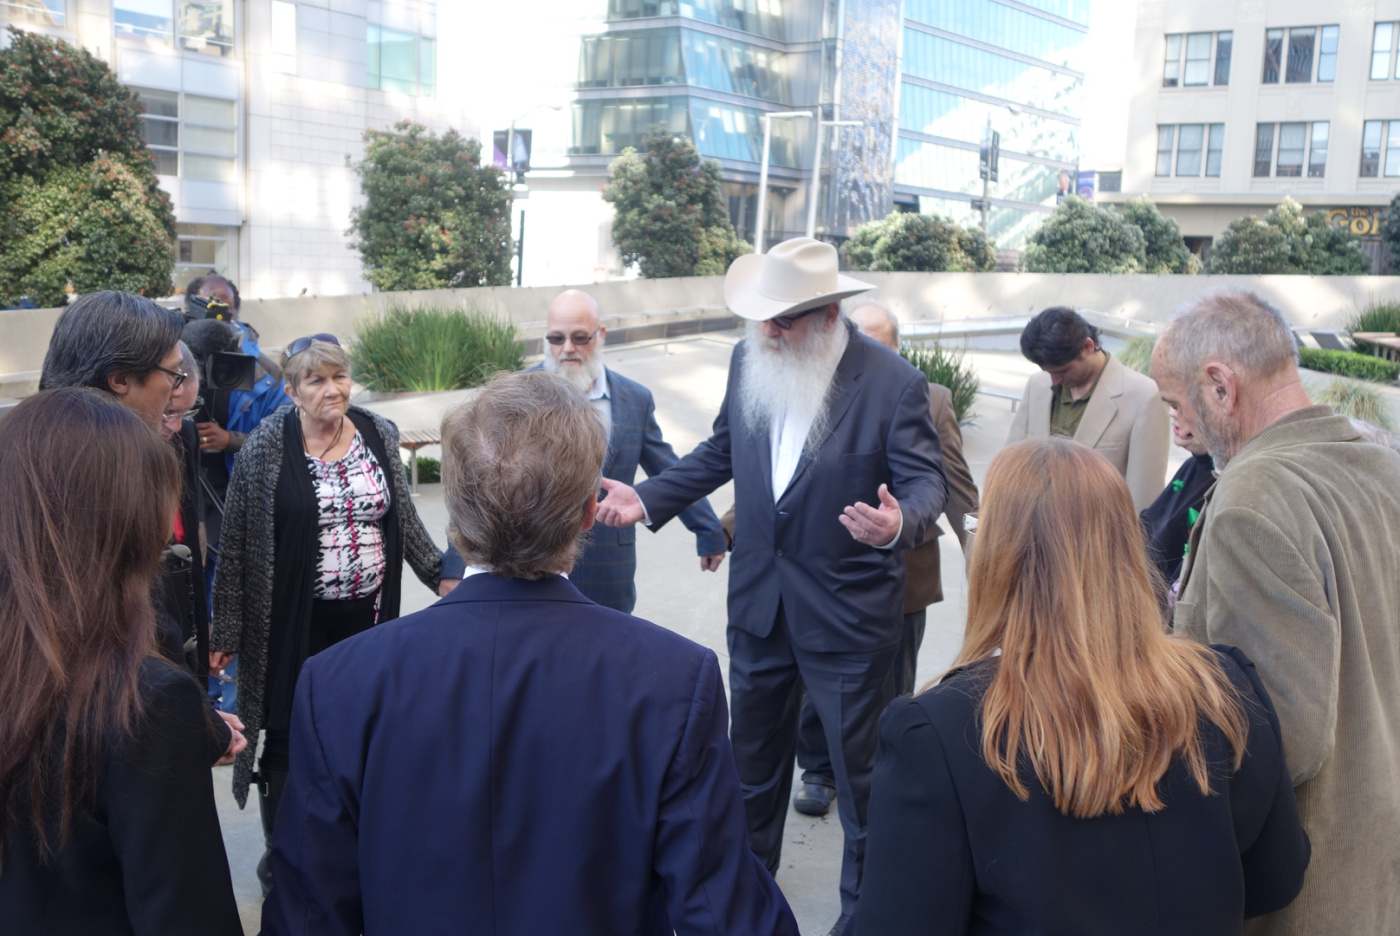 Bryan Davies, owner of medical marijuana dispensary Canna Care, leads supporters in prayer before facing the Internal Revenue Service in tax court on Feb. 24, 2014. 